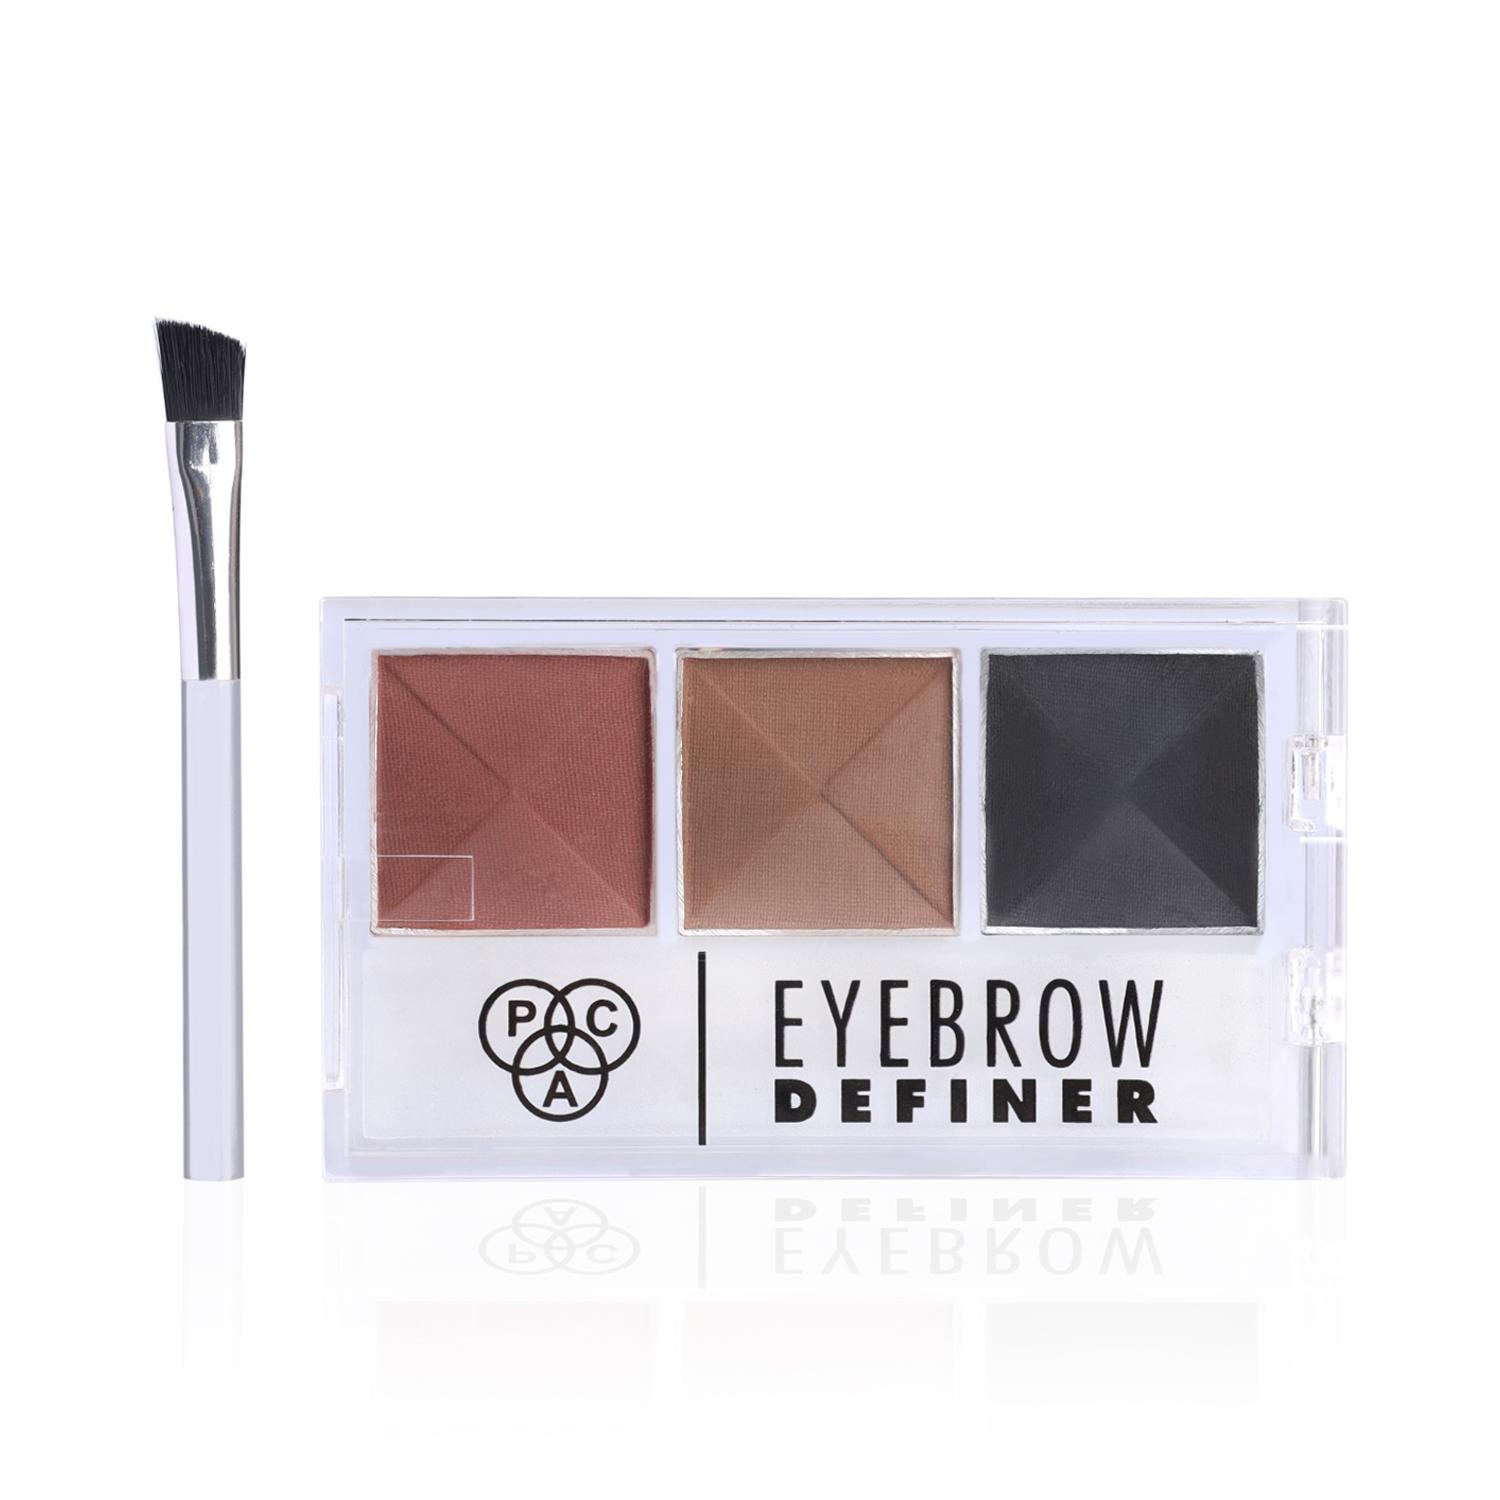 PAC | PAC Eyebrow Definer - 3 Colors (2.5g)